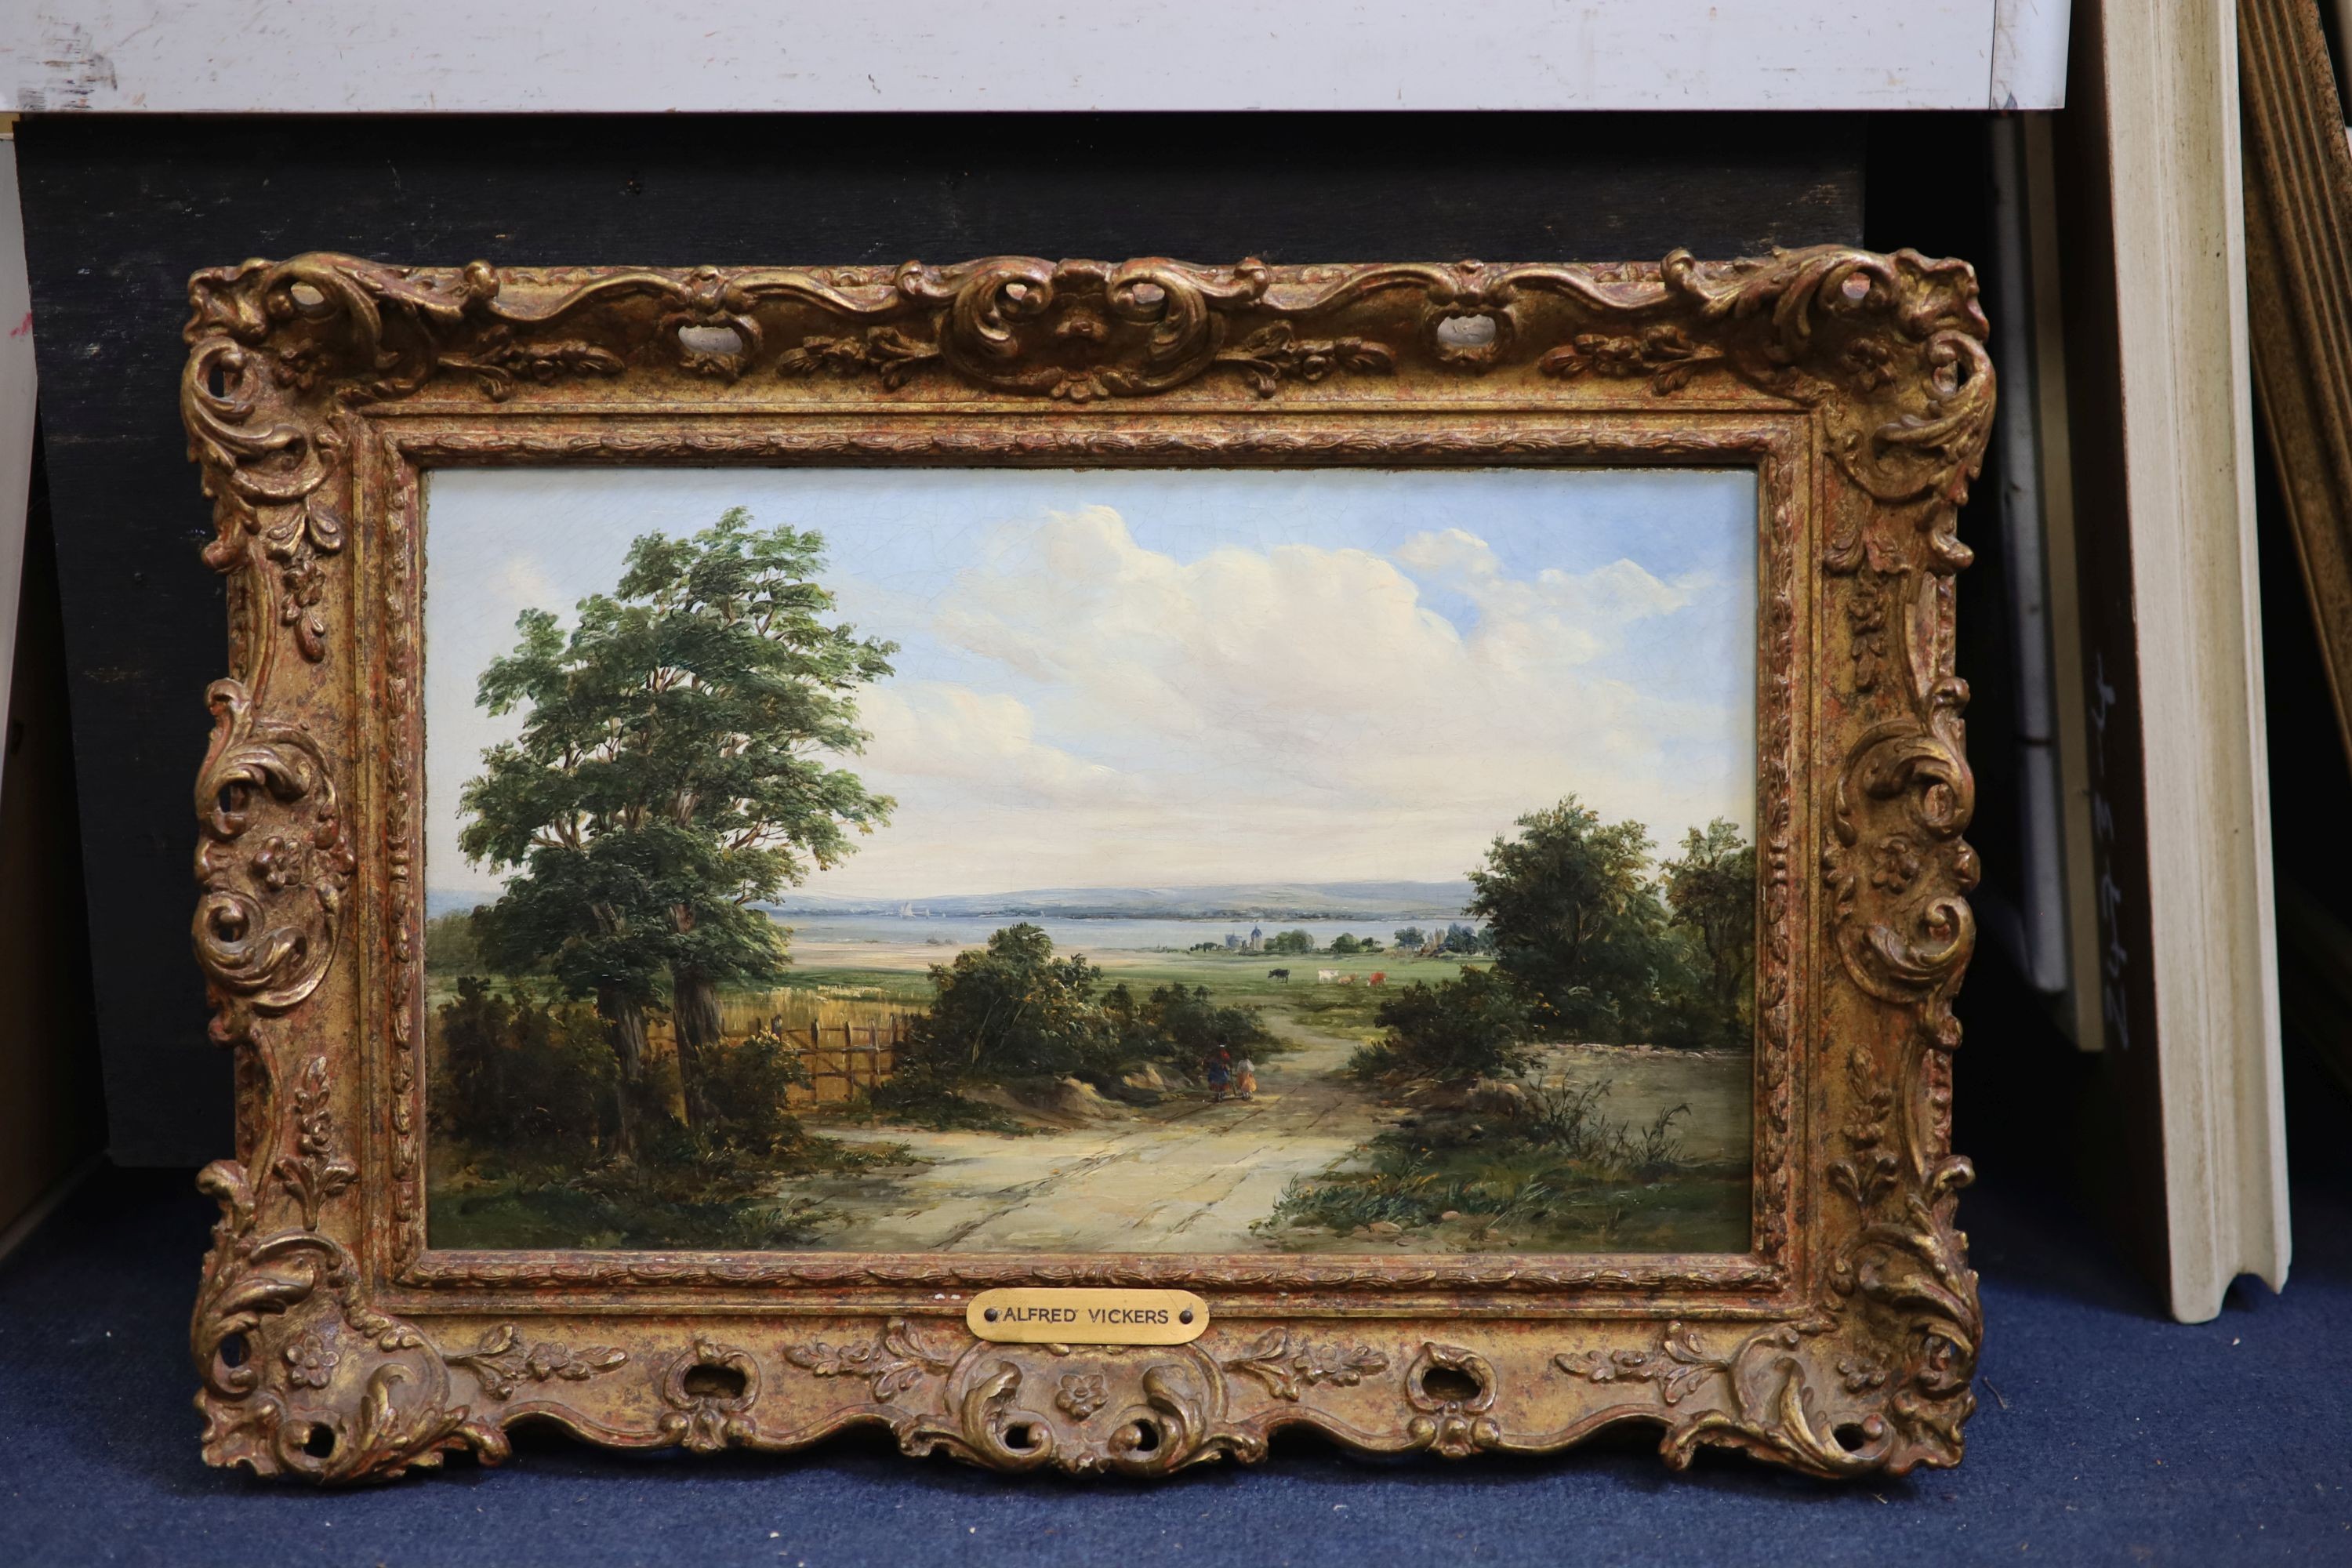 Alfred Vickers (1786-1868), Extensive landscape with figures on a lane looking towards an estuary, oil on canvas, 22 x 37cm